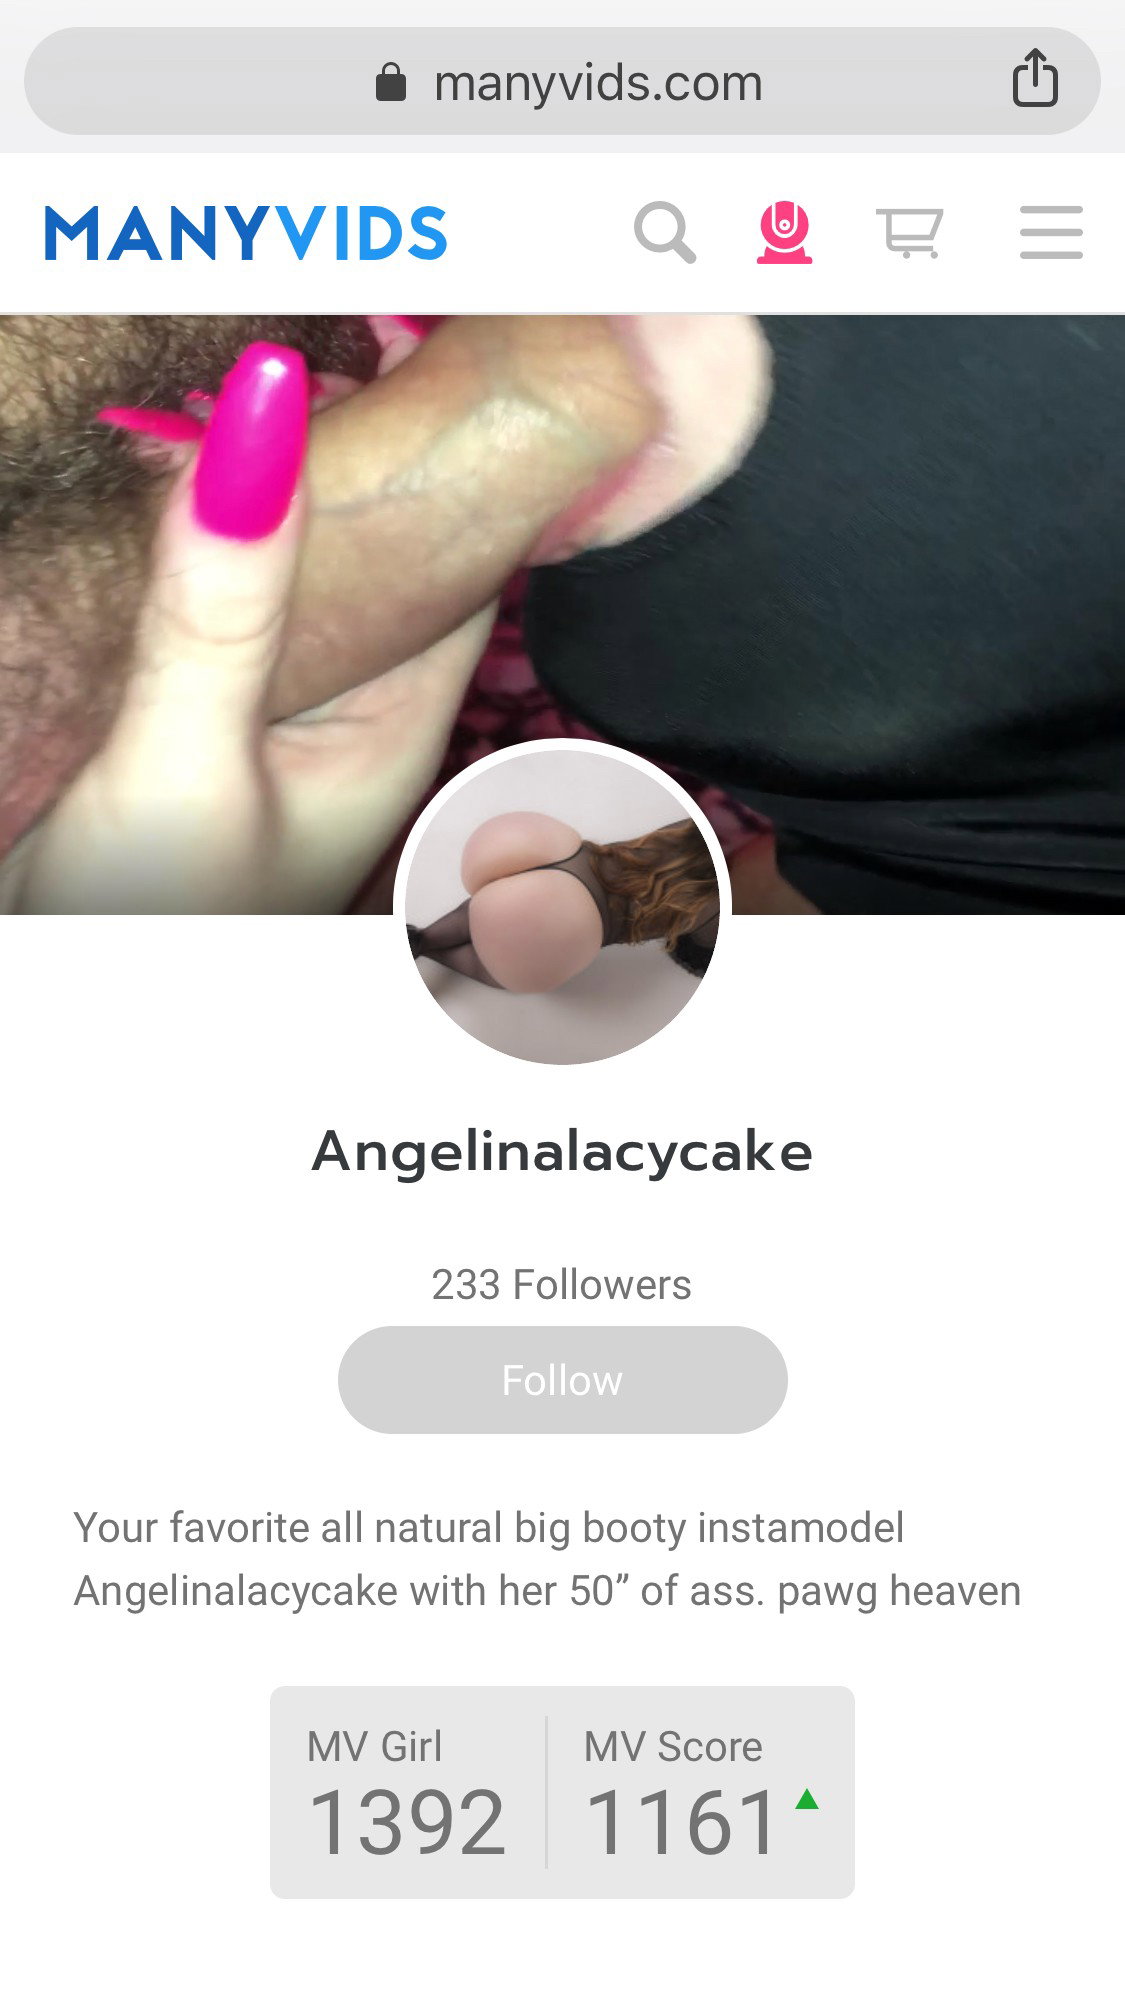 Photo by Angelinalacycake with the username @Angelinalacycake, who is a star user,  January 3, 2019 at 6:23 PM. The post is about the topic Amateurs and the text says 'Angelinalacycake.manyvids.com
FOLLOW ME FOR FREE
WATCH 3 FREE VIDEOS'